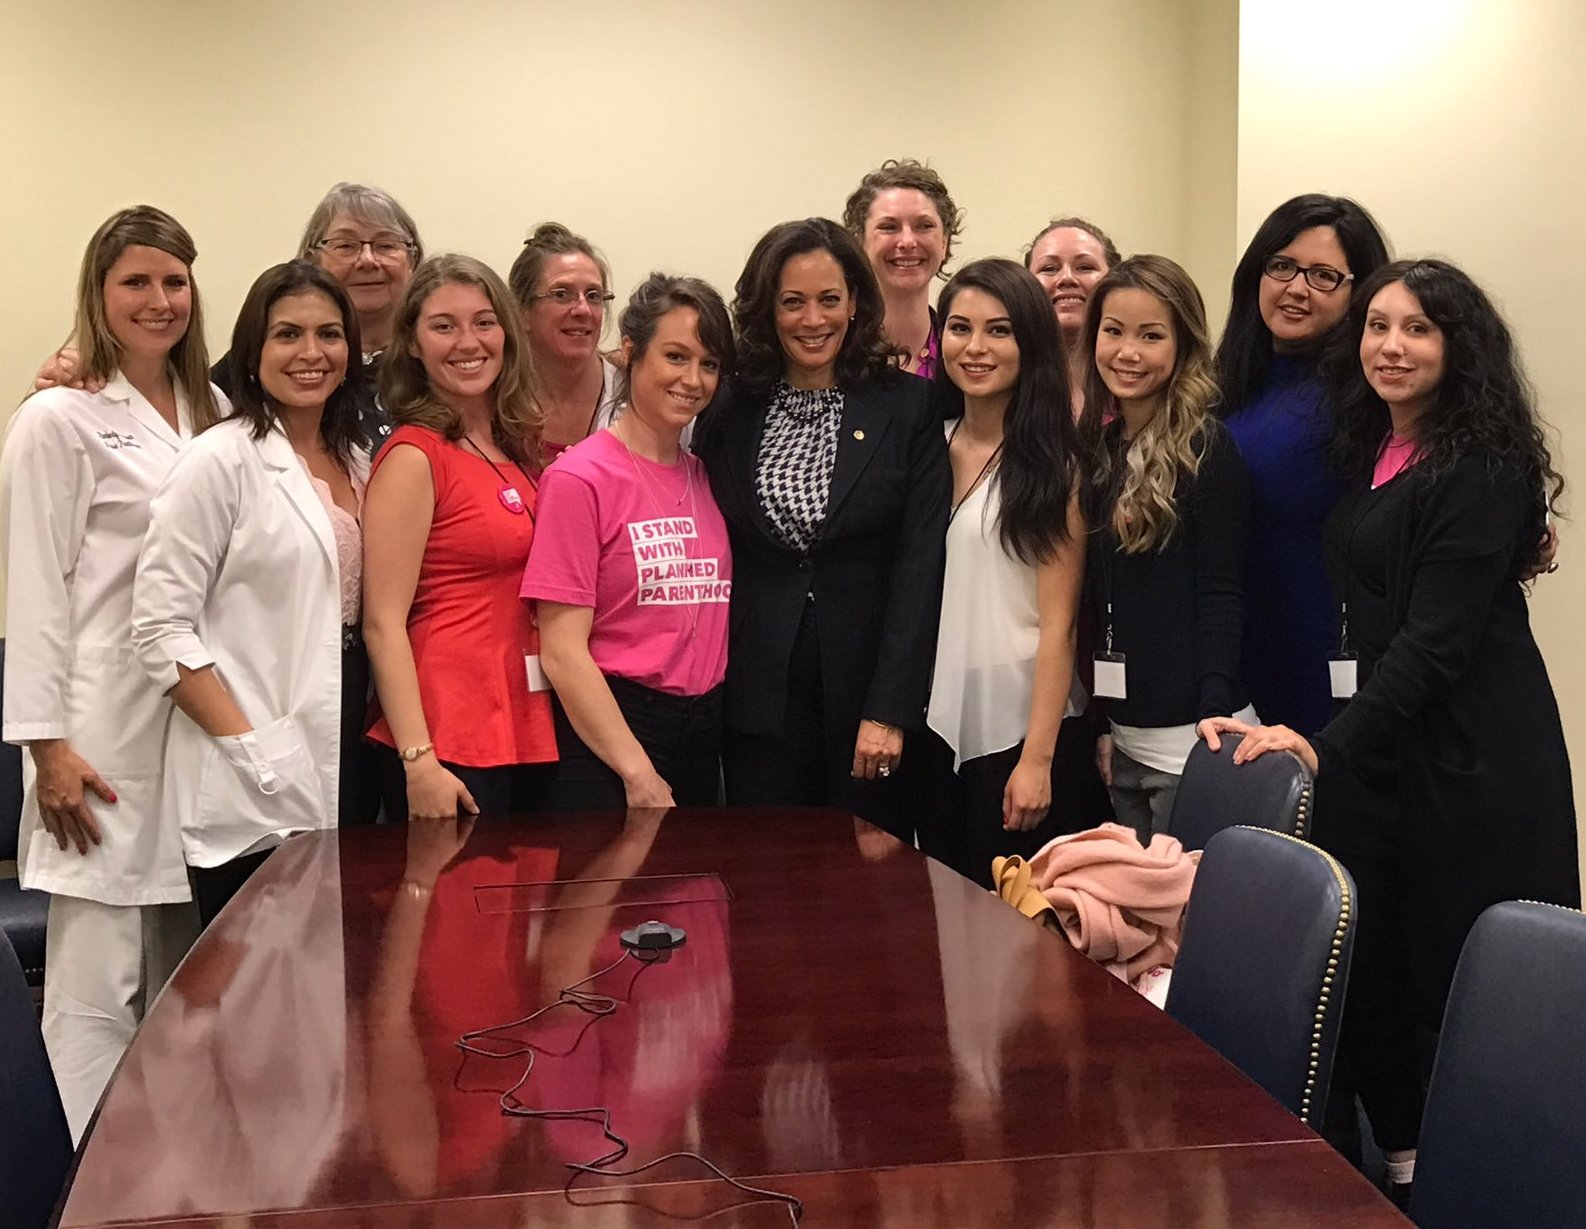 Kamala_Harris_meeting_with_advocates_from_Planned_Parenthood_Action_Fund_C53hx_uU8AIwn_t_cropped.jpg